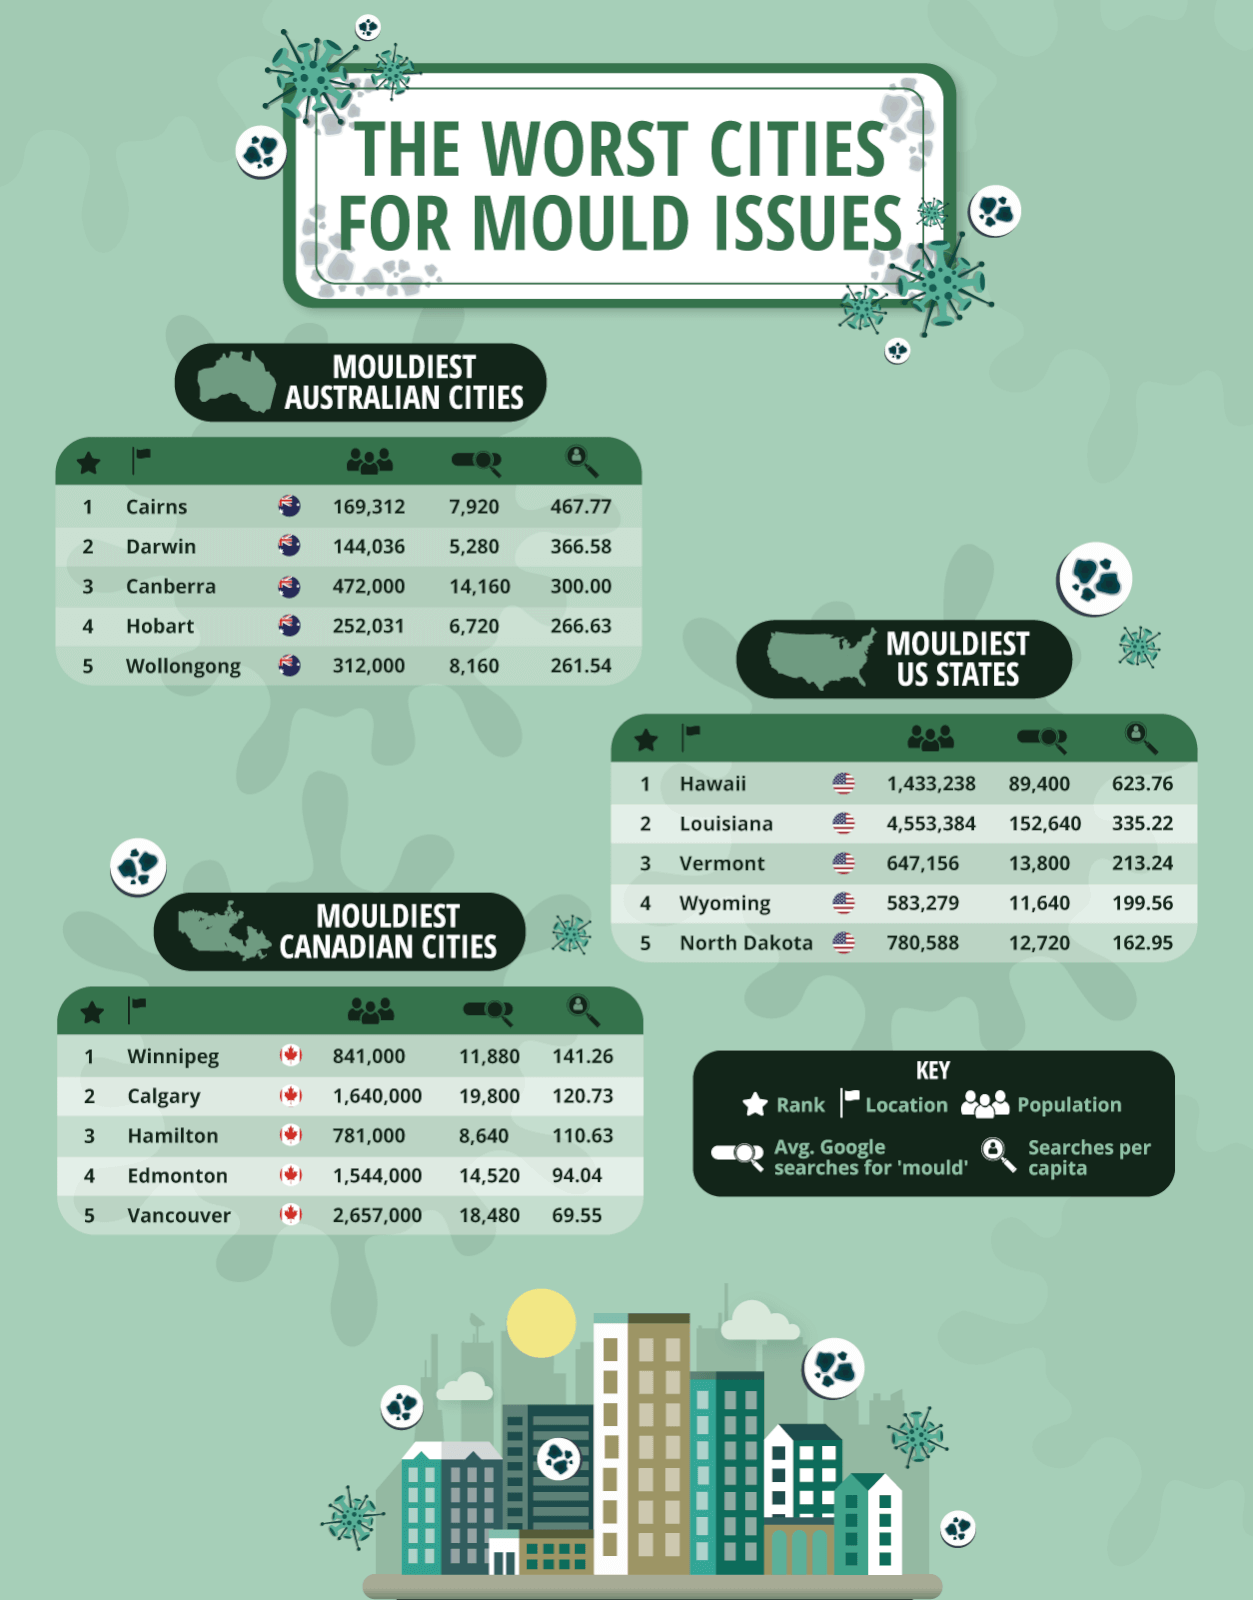 Image showing the cities that are worst for mould issues in Australia, America and Canada.